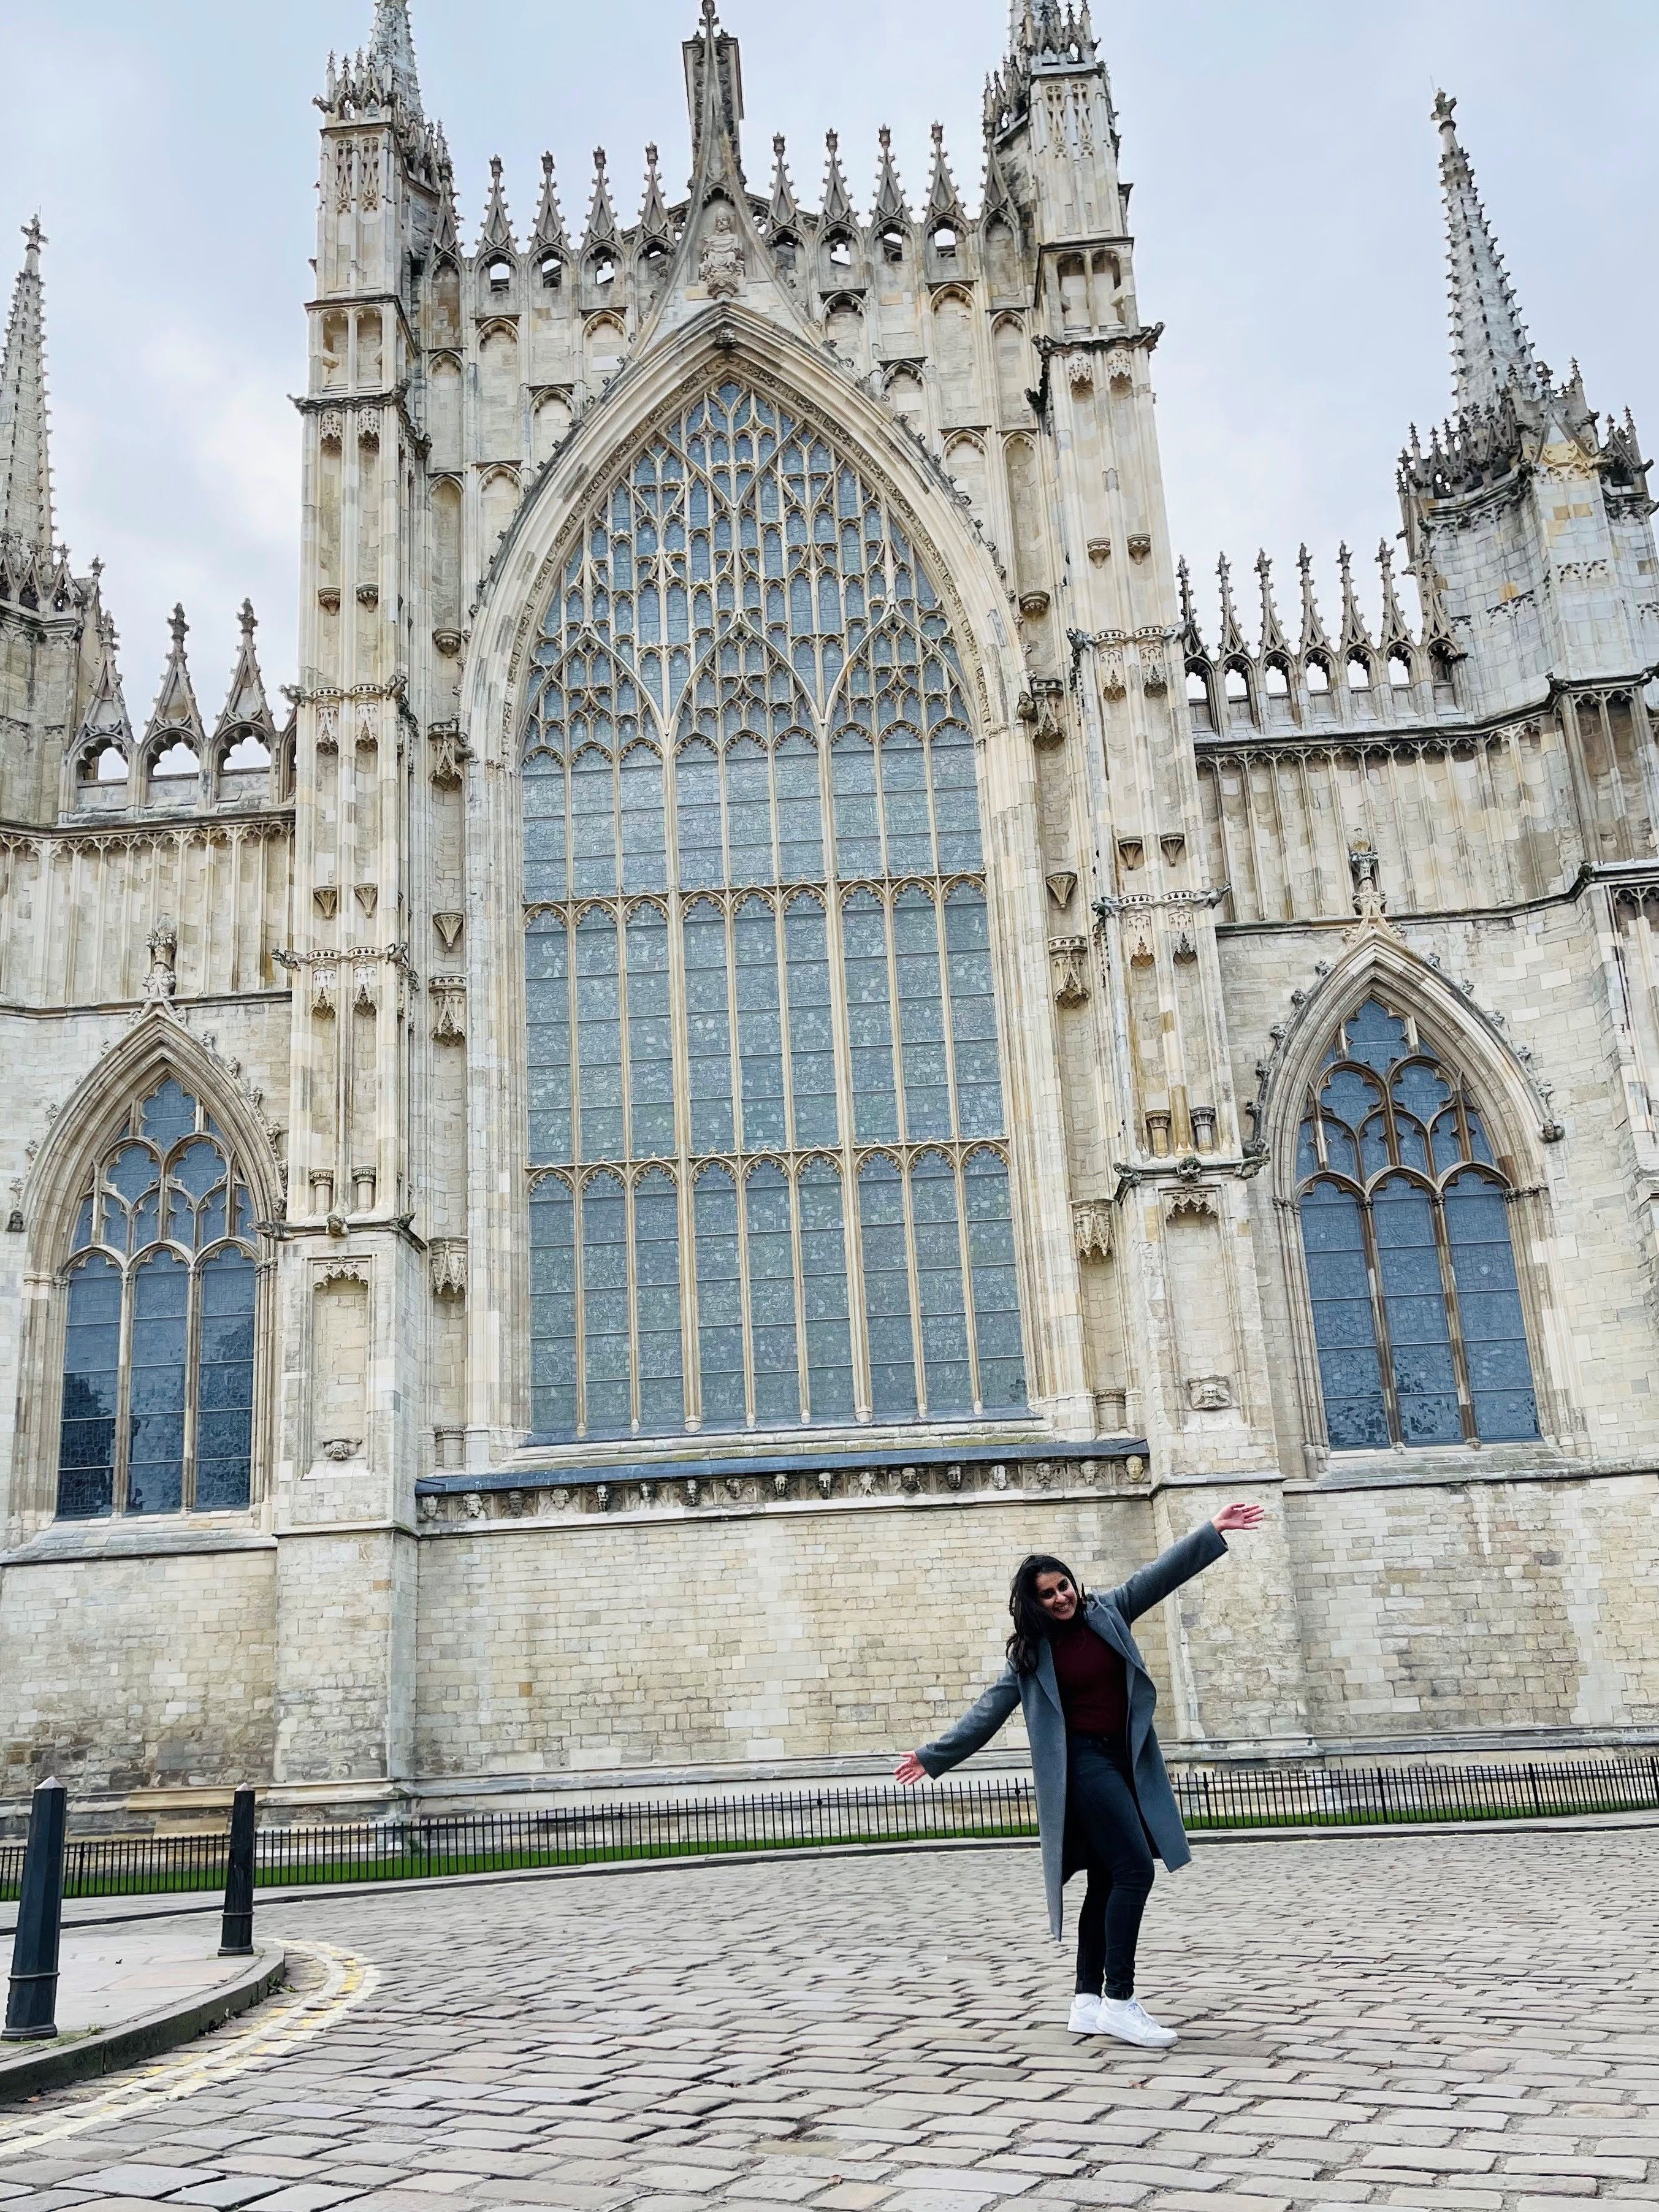 International student in front of York Minster on a grey day. She is posing with her arms wide, in a diagonal fashion, and is smiling.